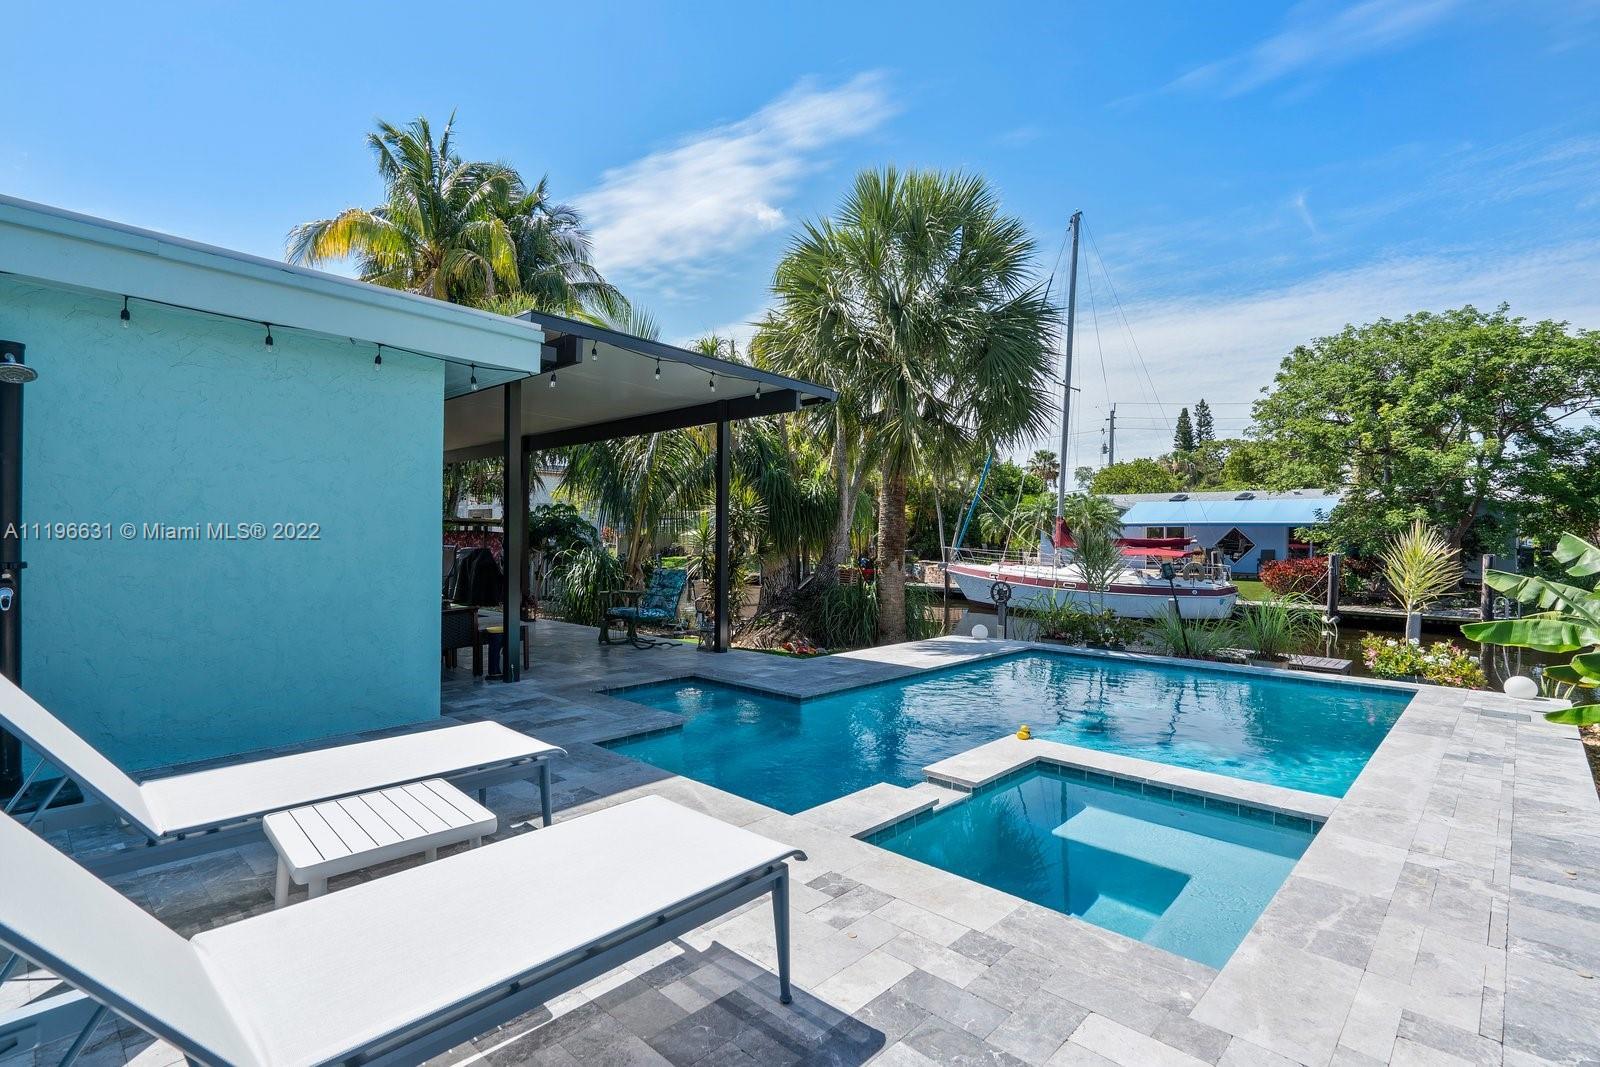 Come see this beautiful GEM in the prestigious Gill Isles Community just minutes away from Las Olas.